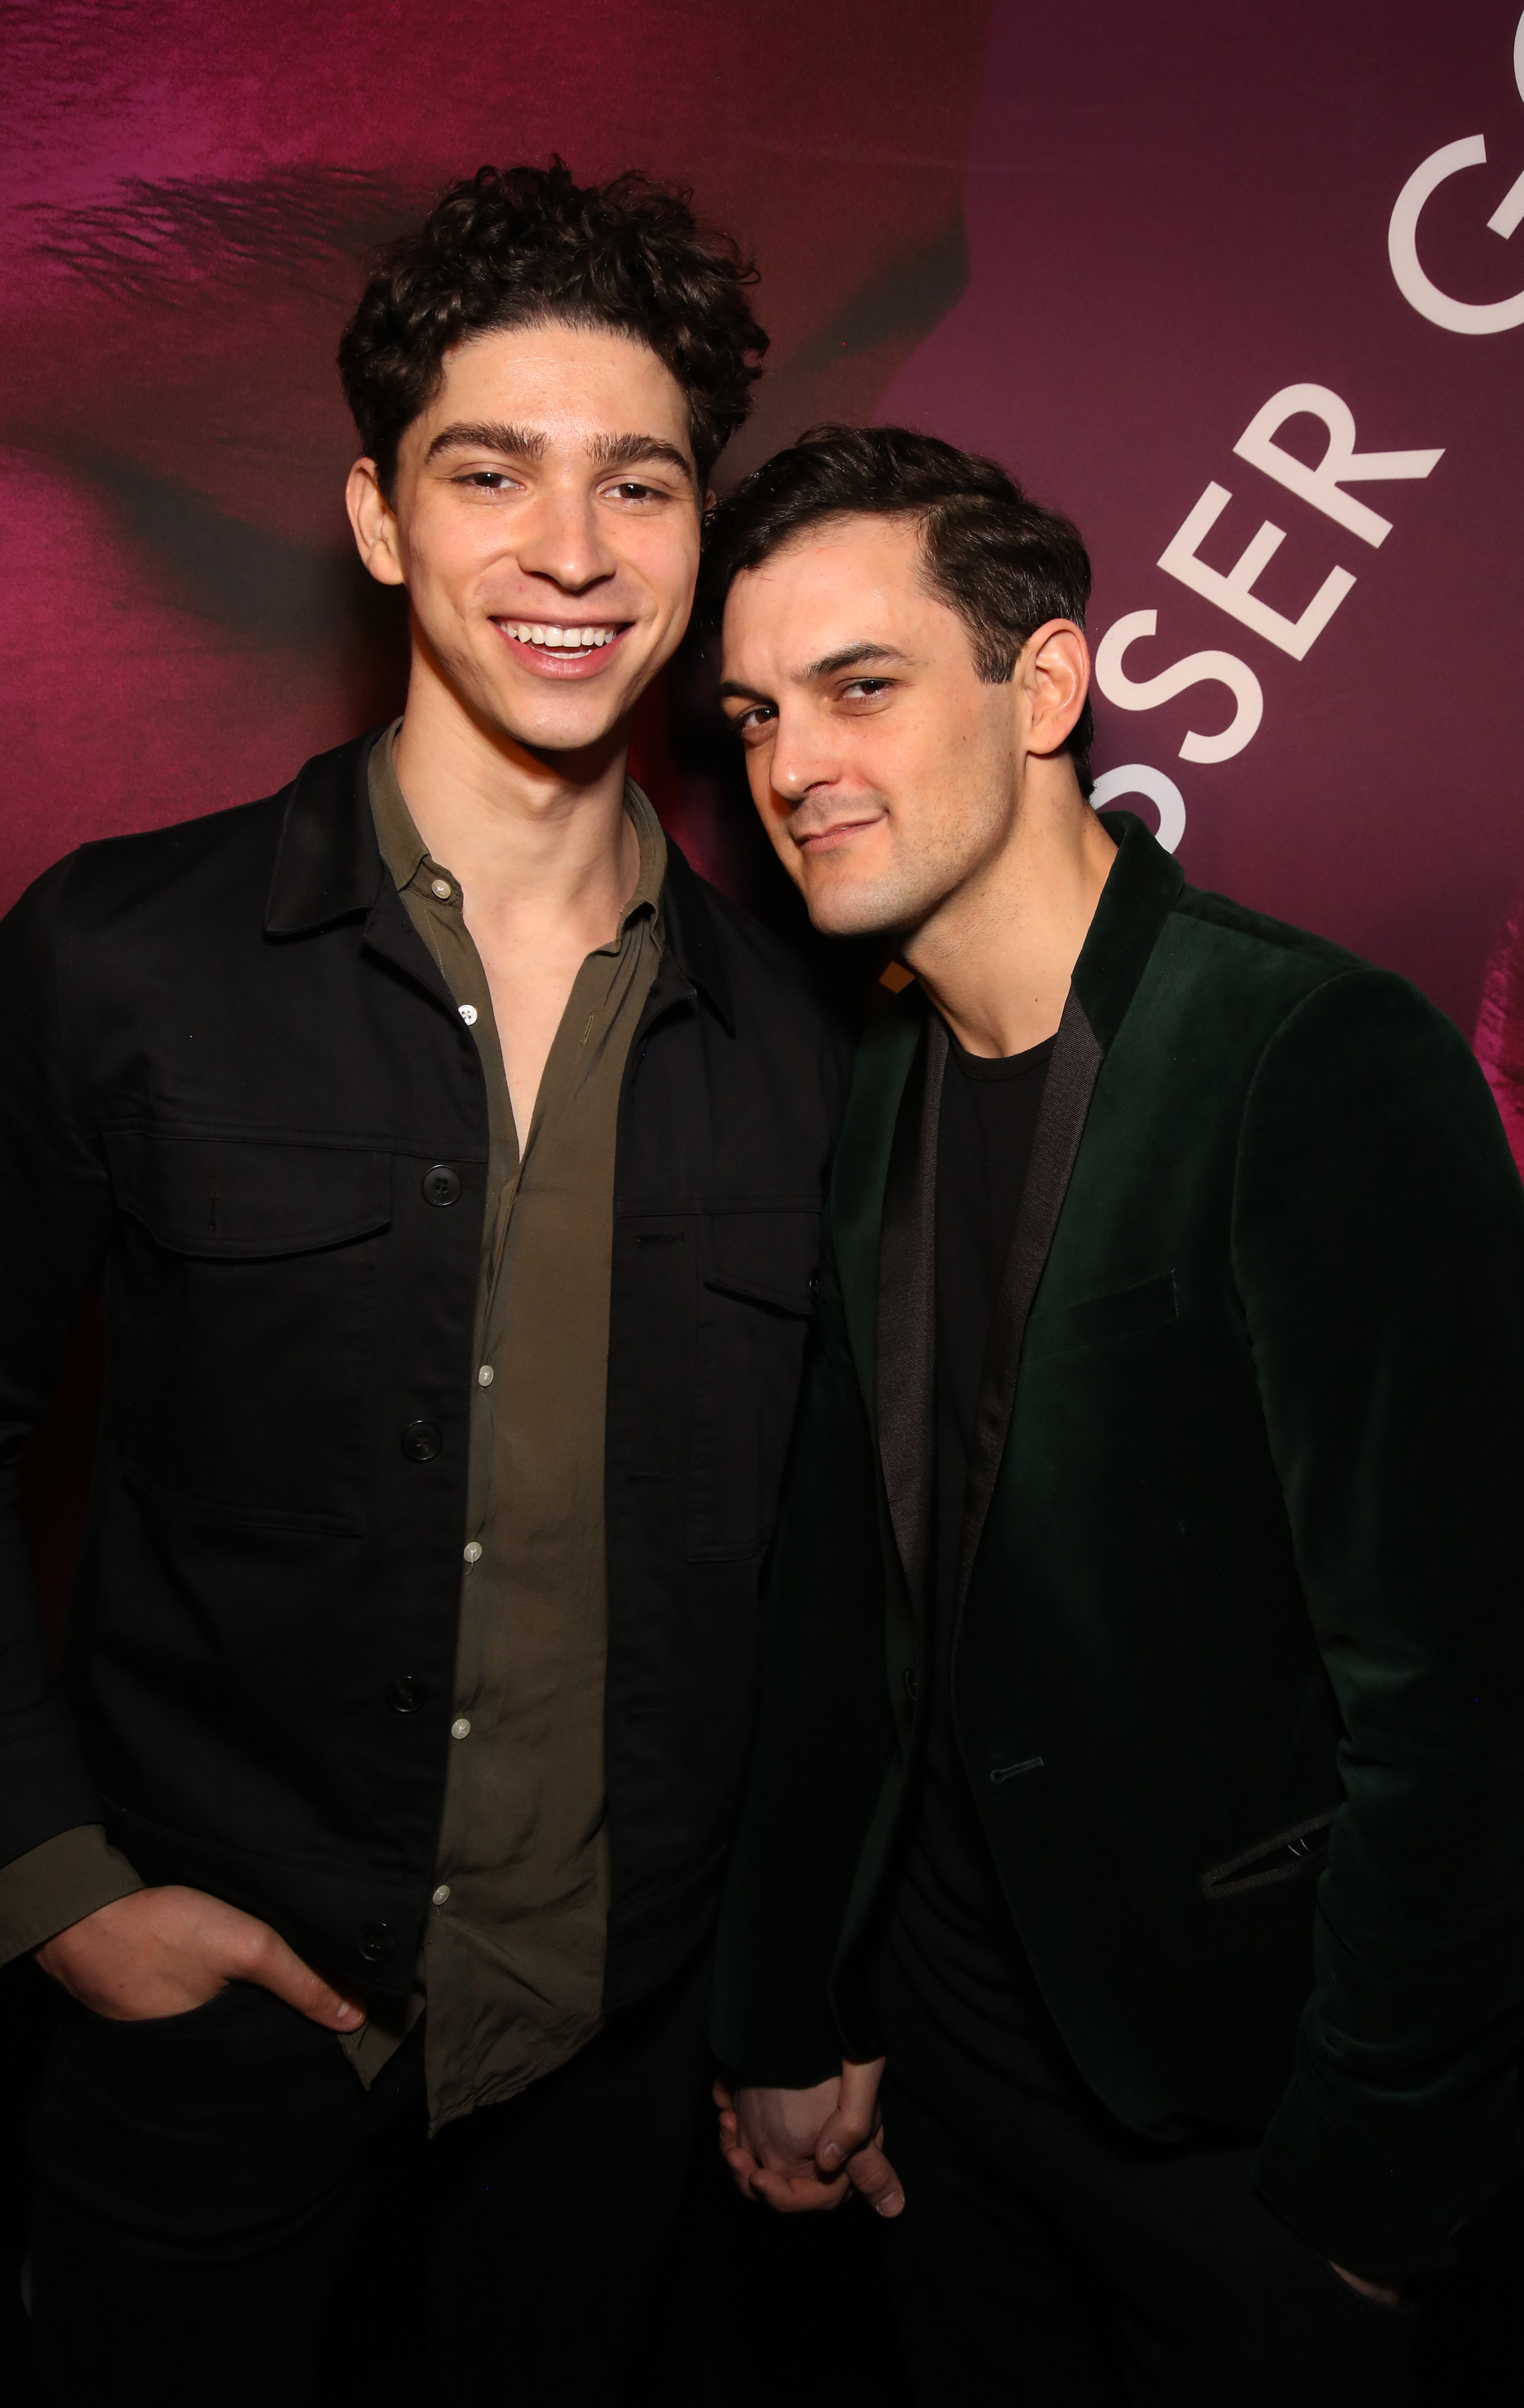 Isaac Cole Powell and Wesley Taylor attend the Broadway Opening Night Performance for "Children of a Lesser God" at Studio 54 Theatre on April 11, 2018, in New York City. | Source: Getty Images